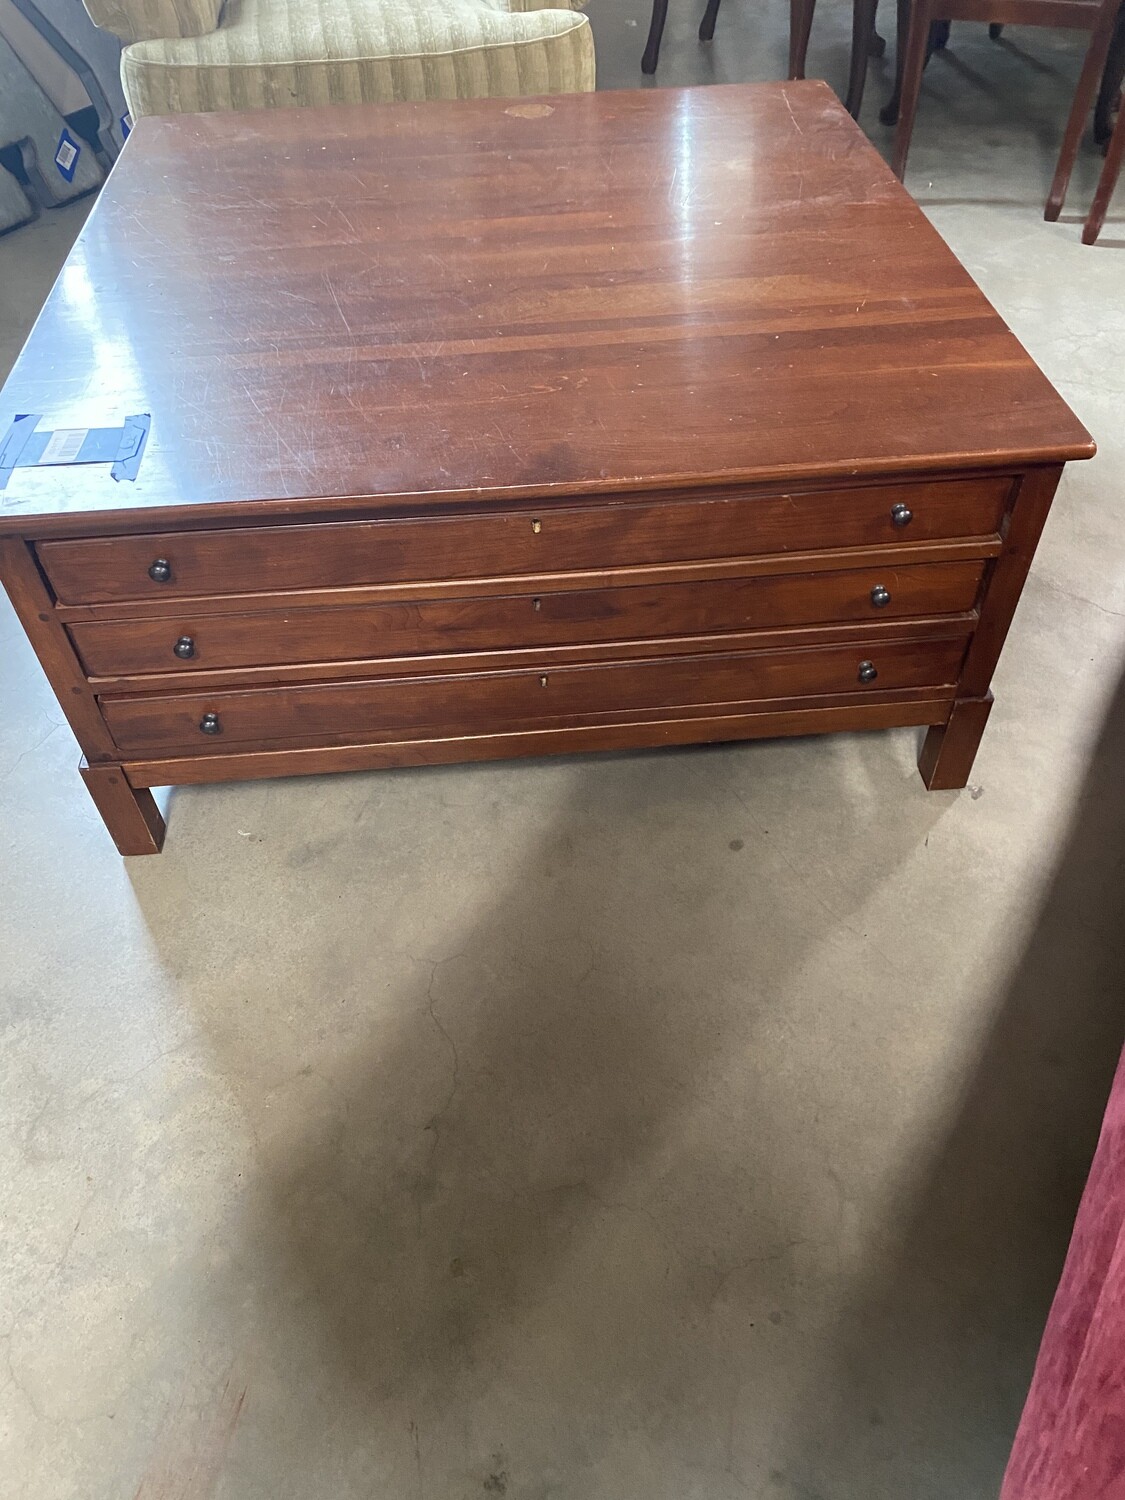 CLEARANCE PUZZLE TABLE